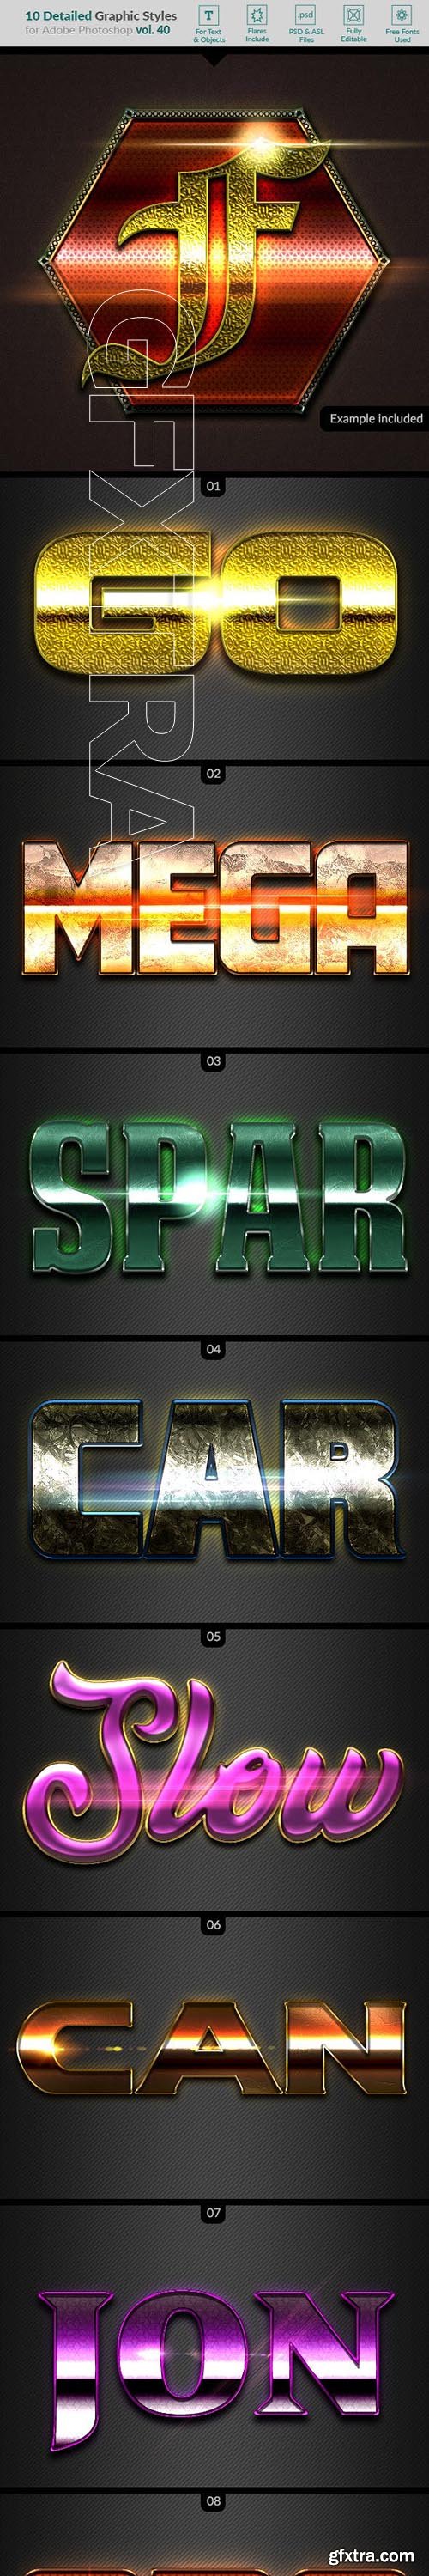 GraphicRiver - 10 Text Effects Vol 40 23504095